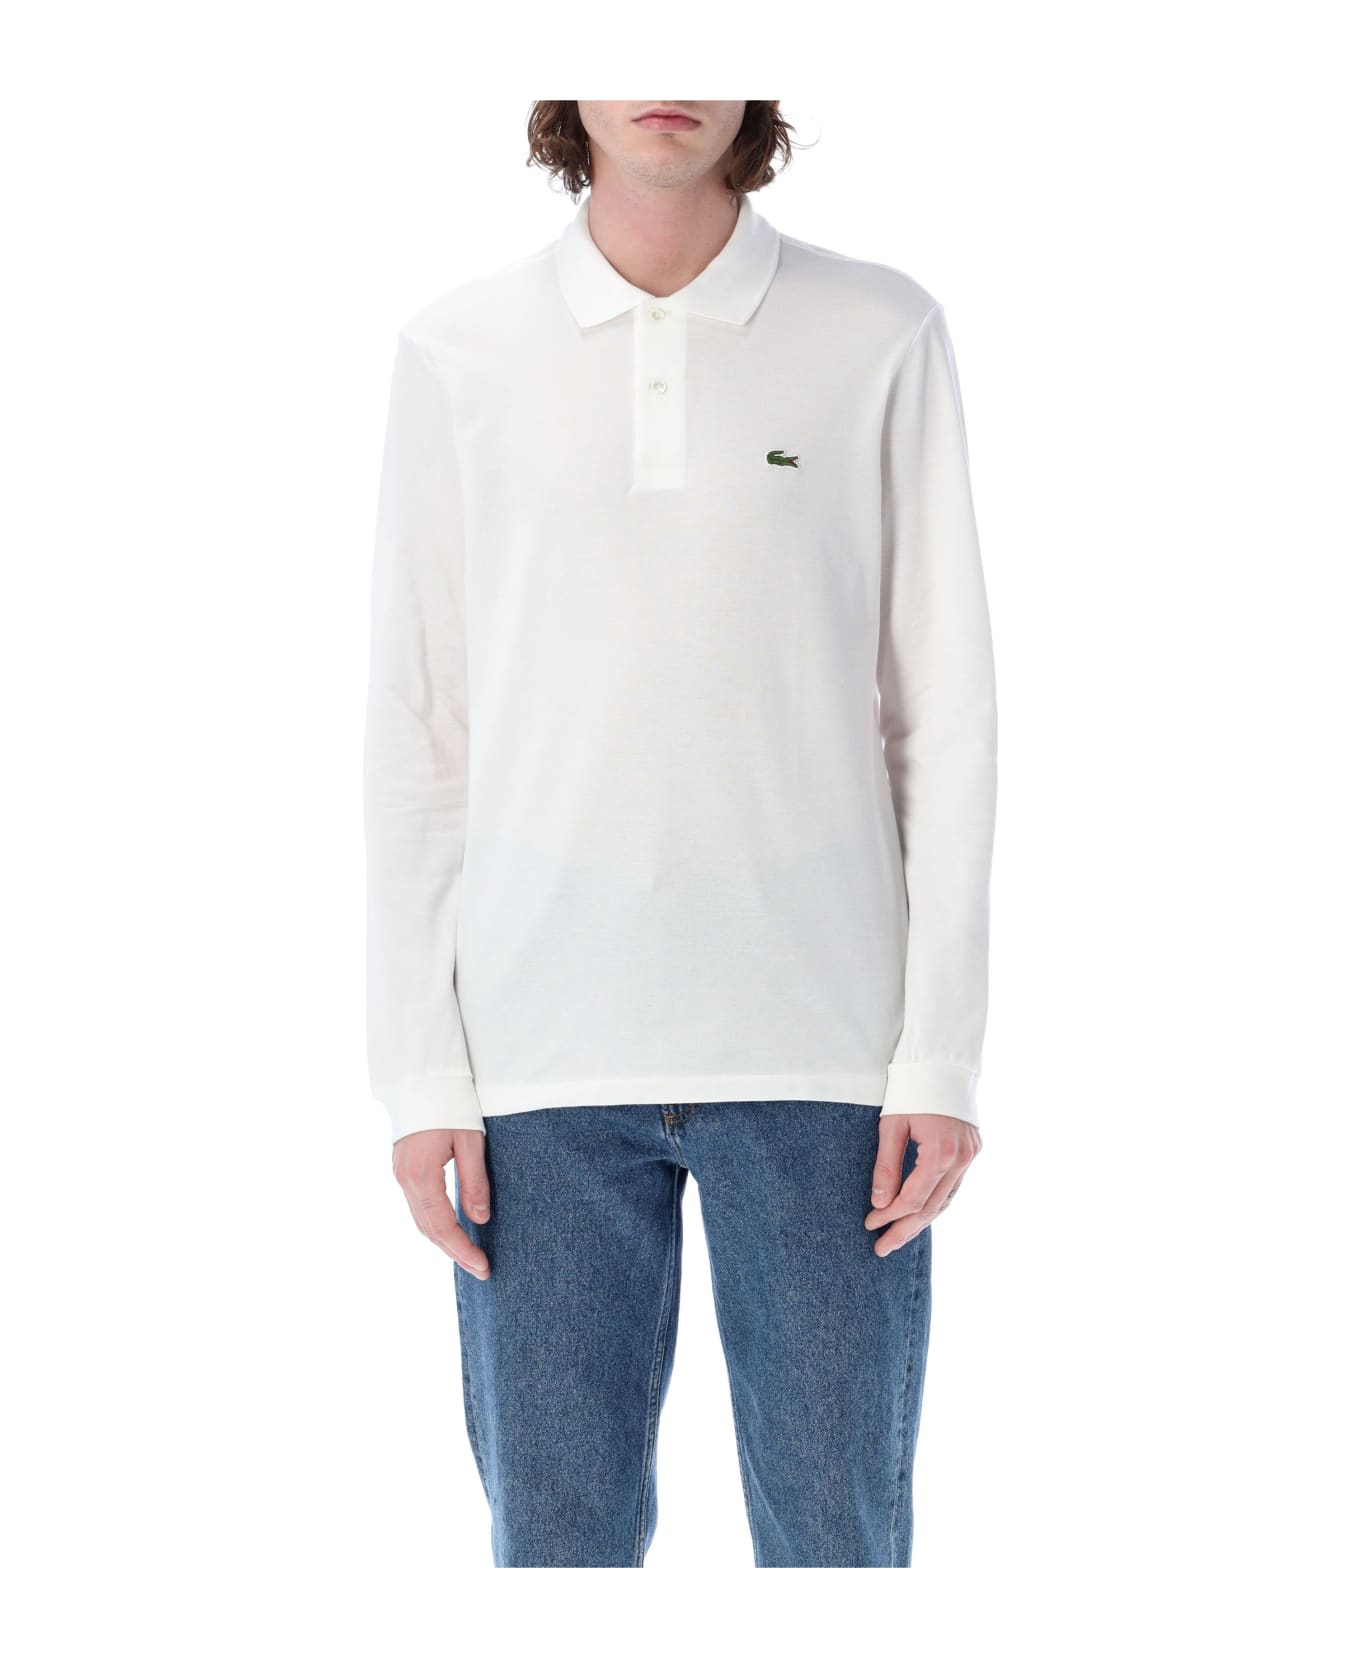 Lacoste Classic Fit L/s Polo Shirt - WHITE